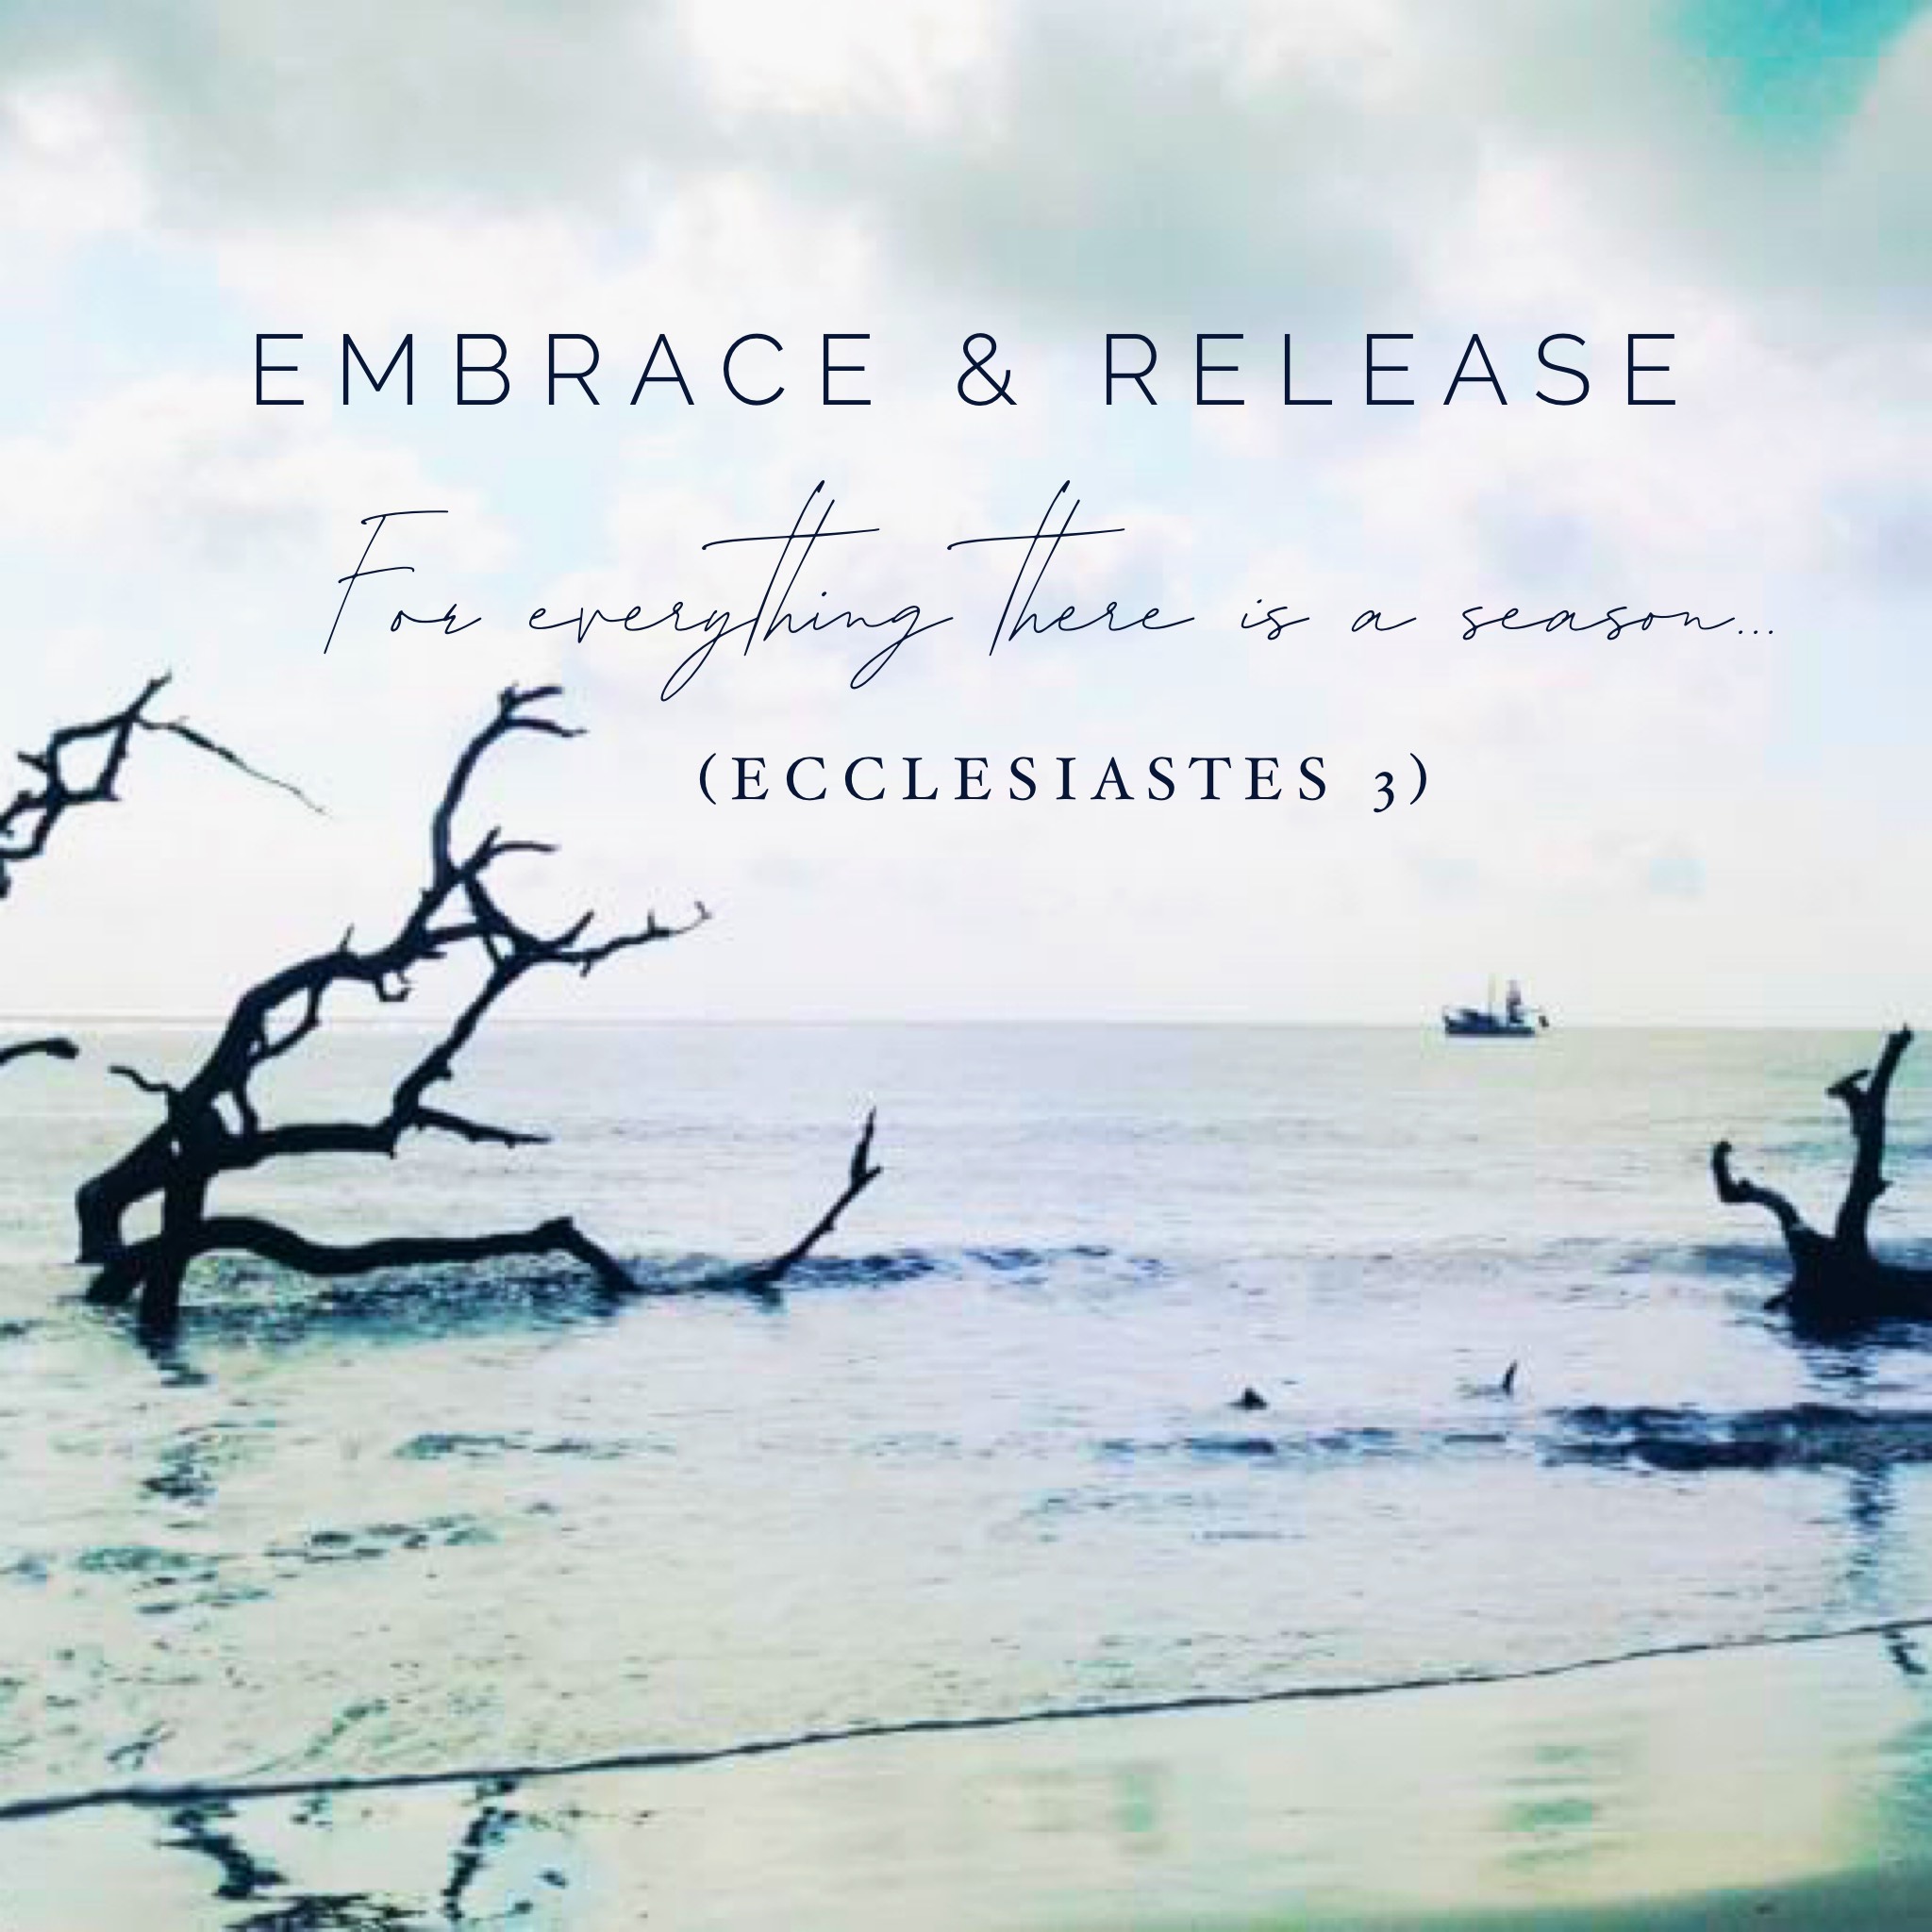 Embrace & Release Podcasts, Episode 1: Corona-cation Relfections, "Life Just Got a Reset Button"